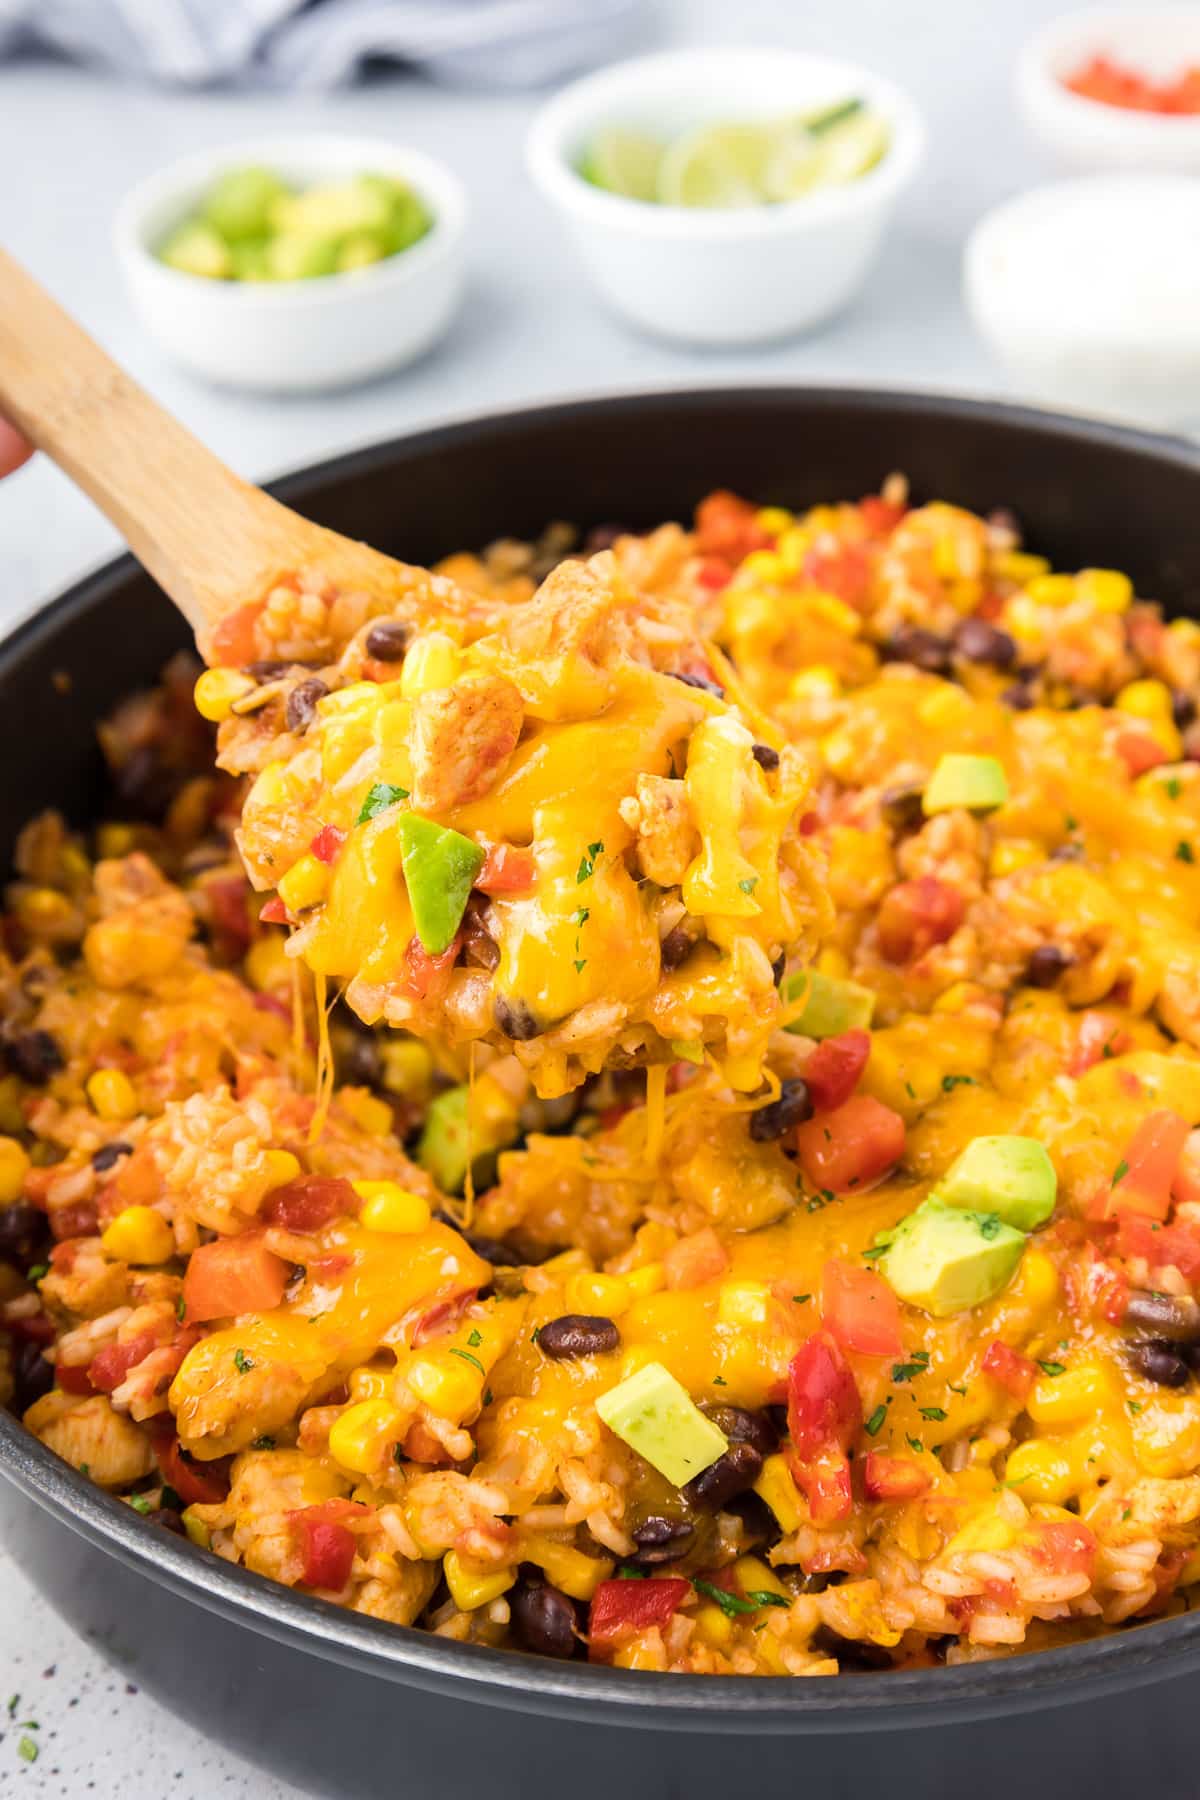 Mexican rice with chicken, vegetables and cheese in a skillet with a wooden spoon lifting a spoonful.